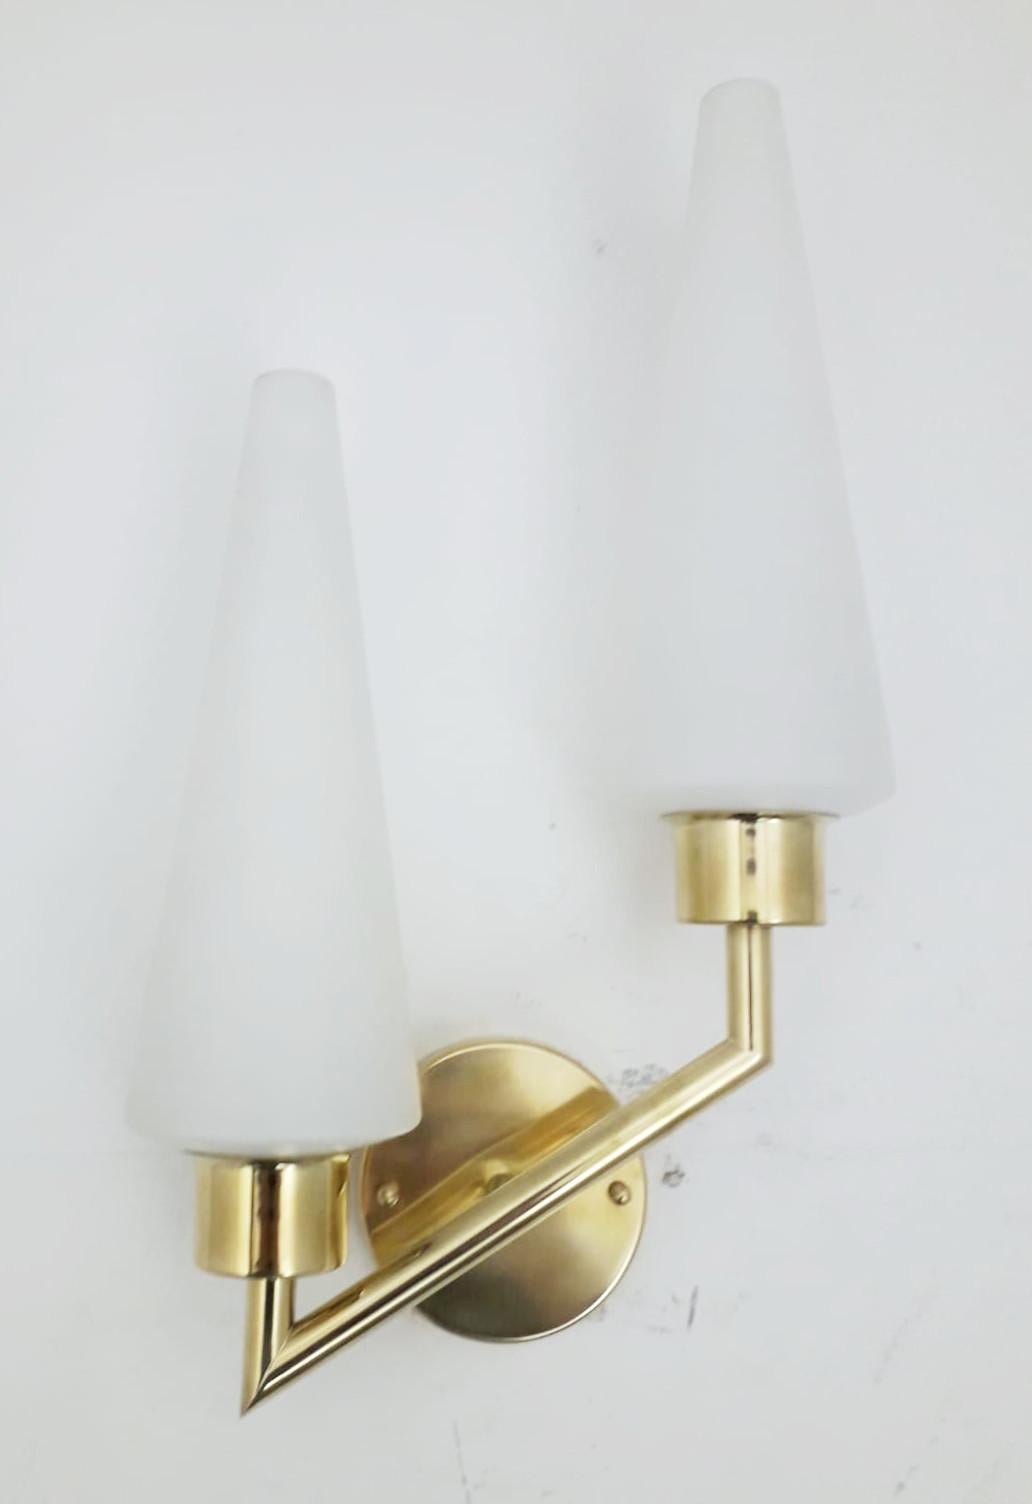 Mid-Century Modern Midcentury Double Cone Stilnovo Sconce - 10 available For Sale